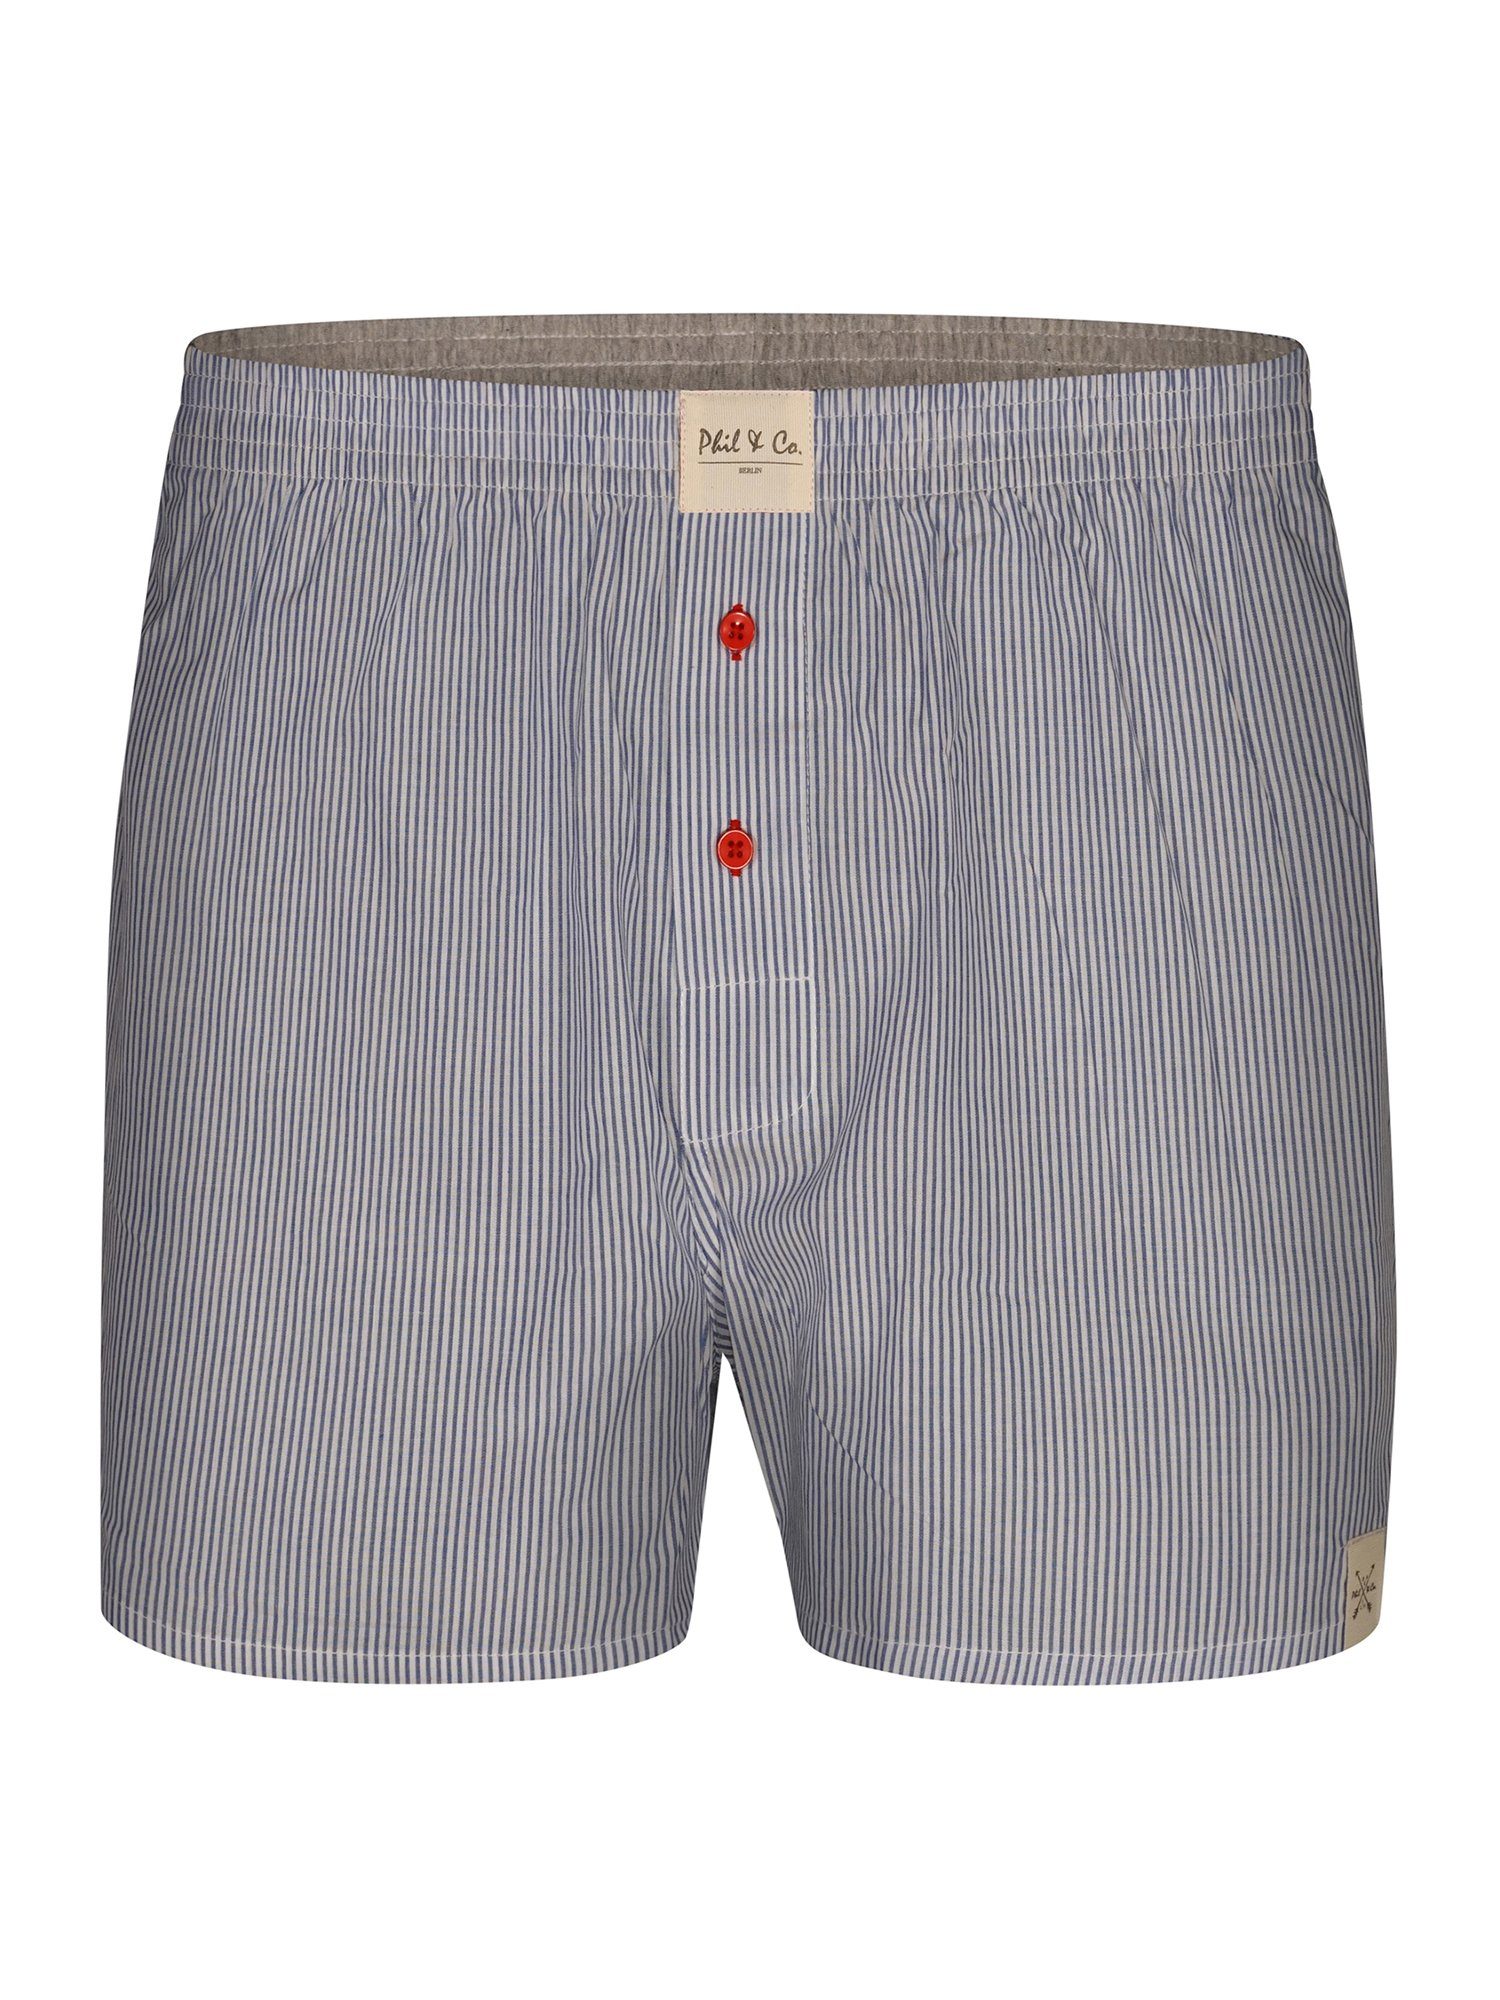 Classic (4-St) & Phil Co. grey Web cool Boxer